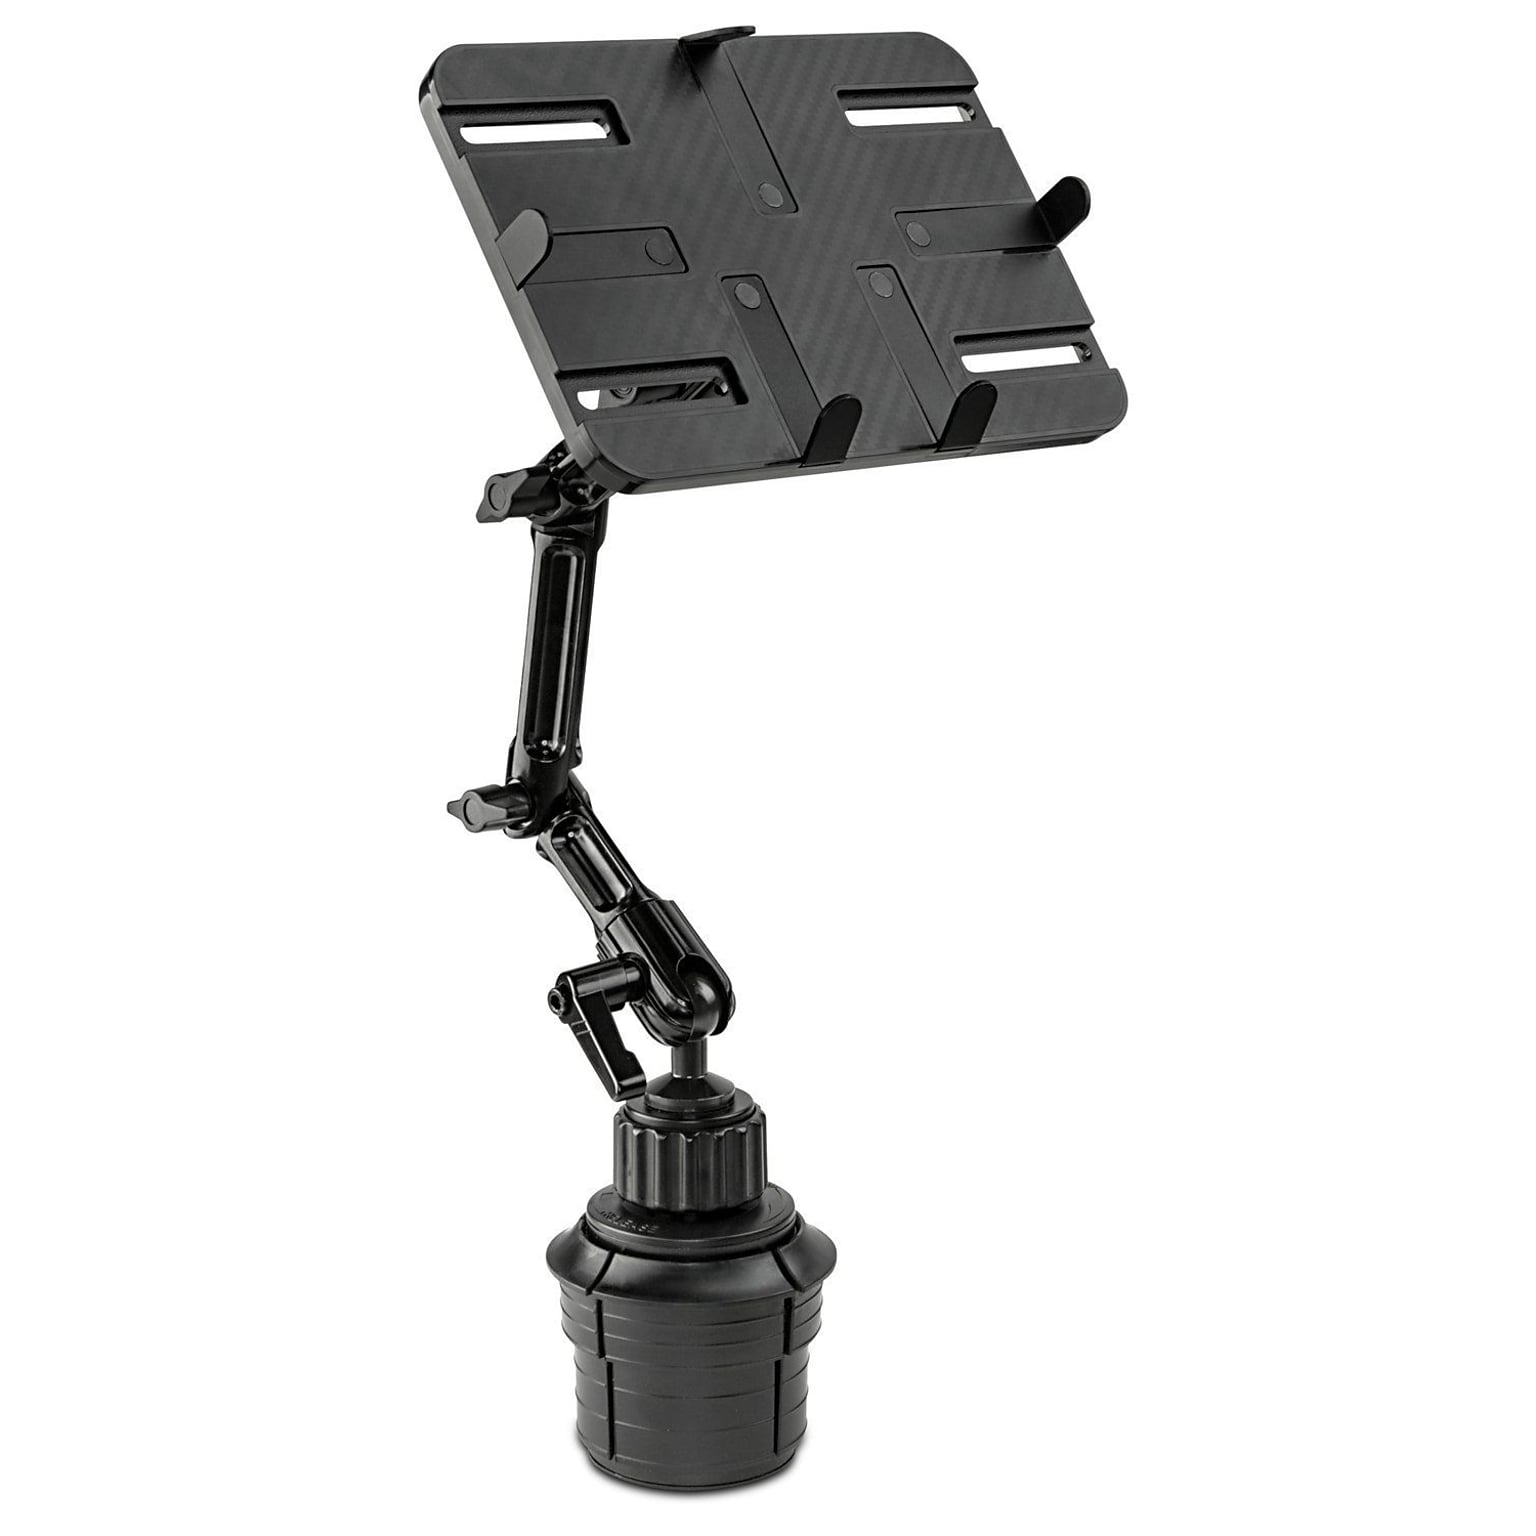 Mount-It! Tablet Car Cup Holder Mount for iPad 2/3/iPad Air/iPad Air 2 and 7 to 11 Tablets, Black (MI-7320)